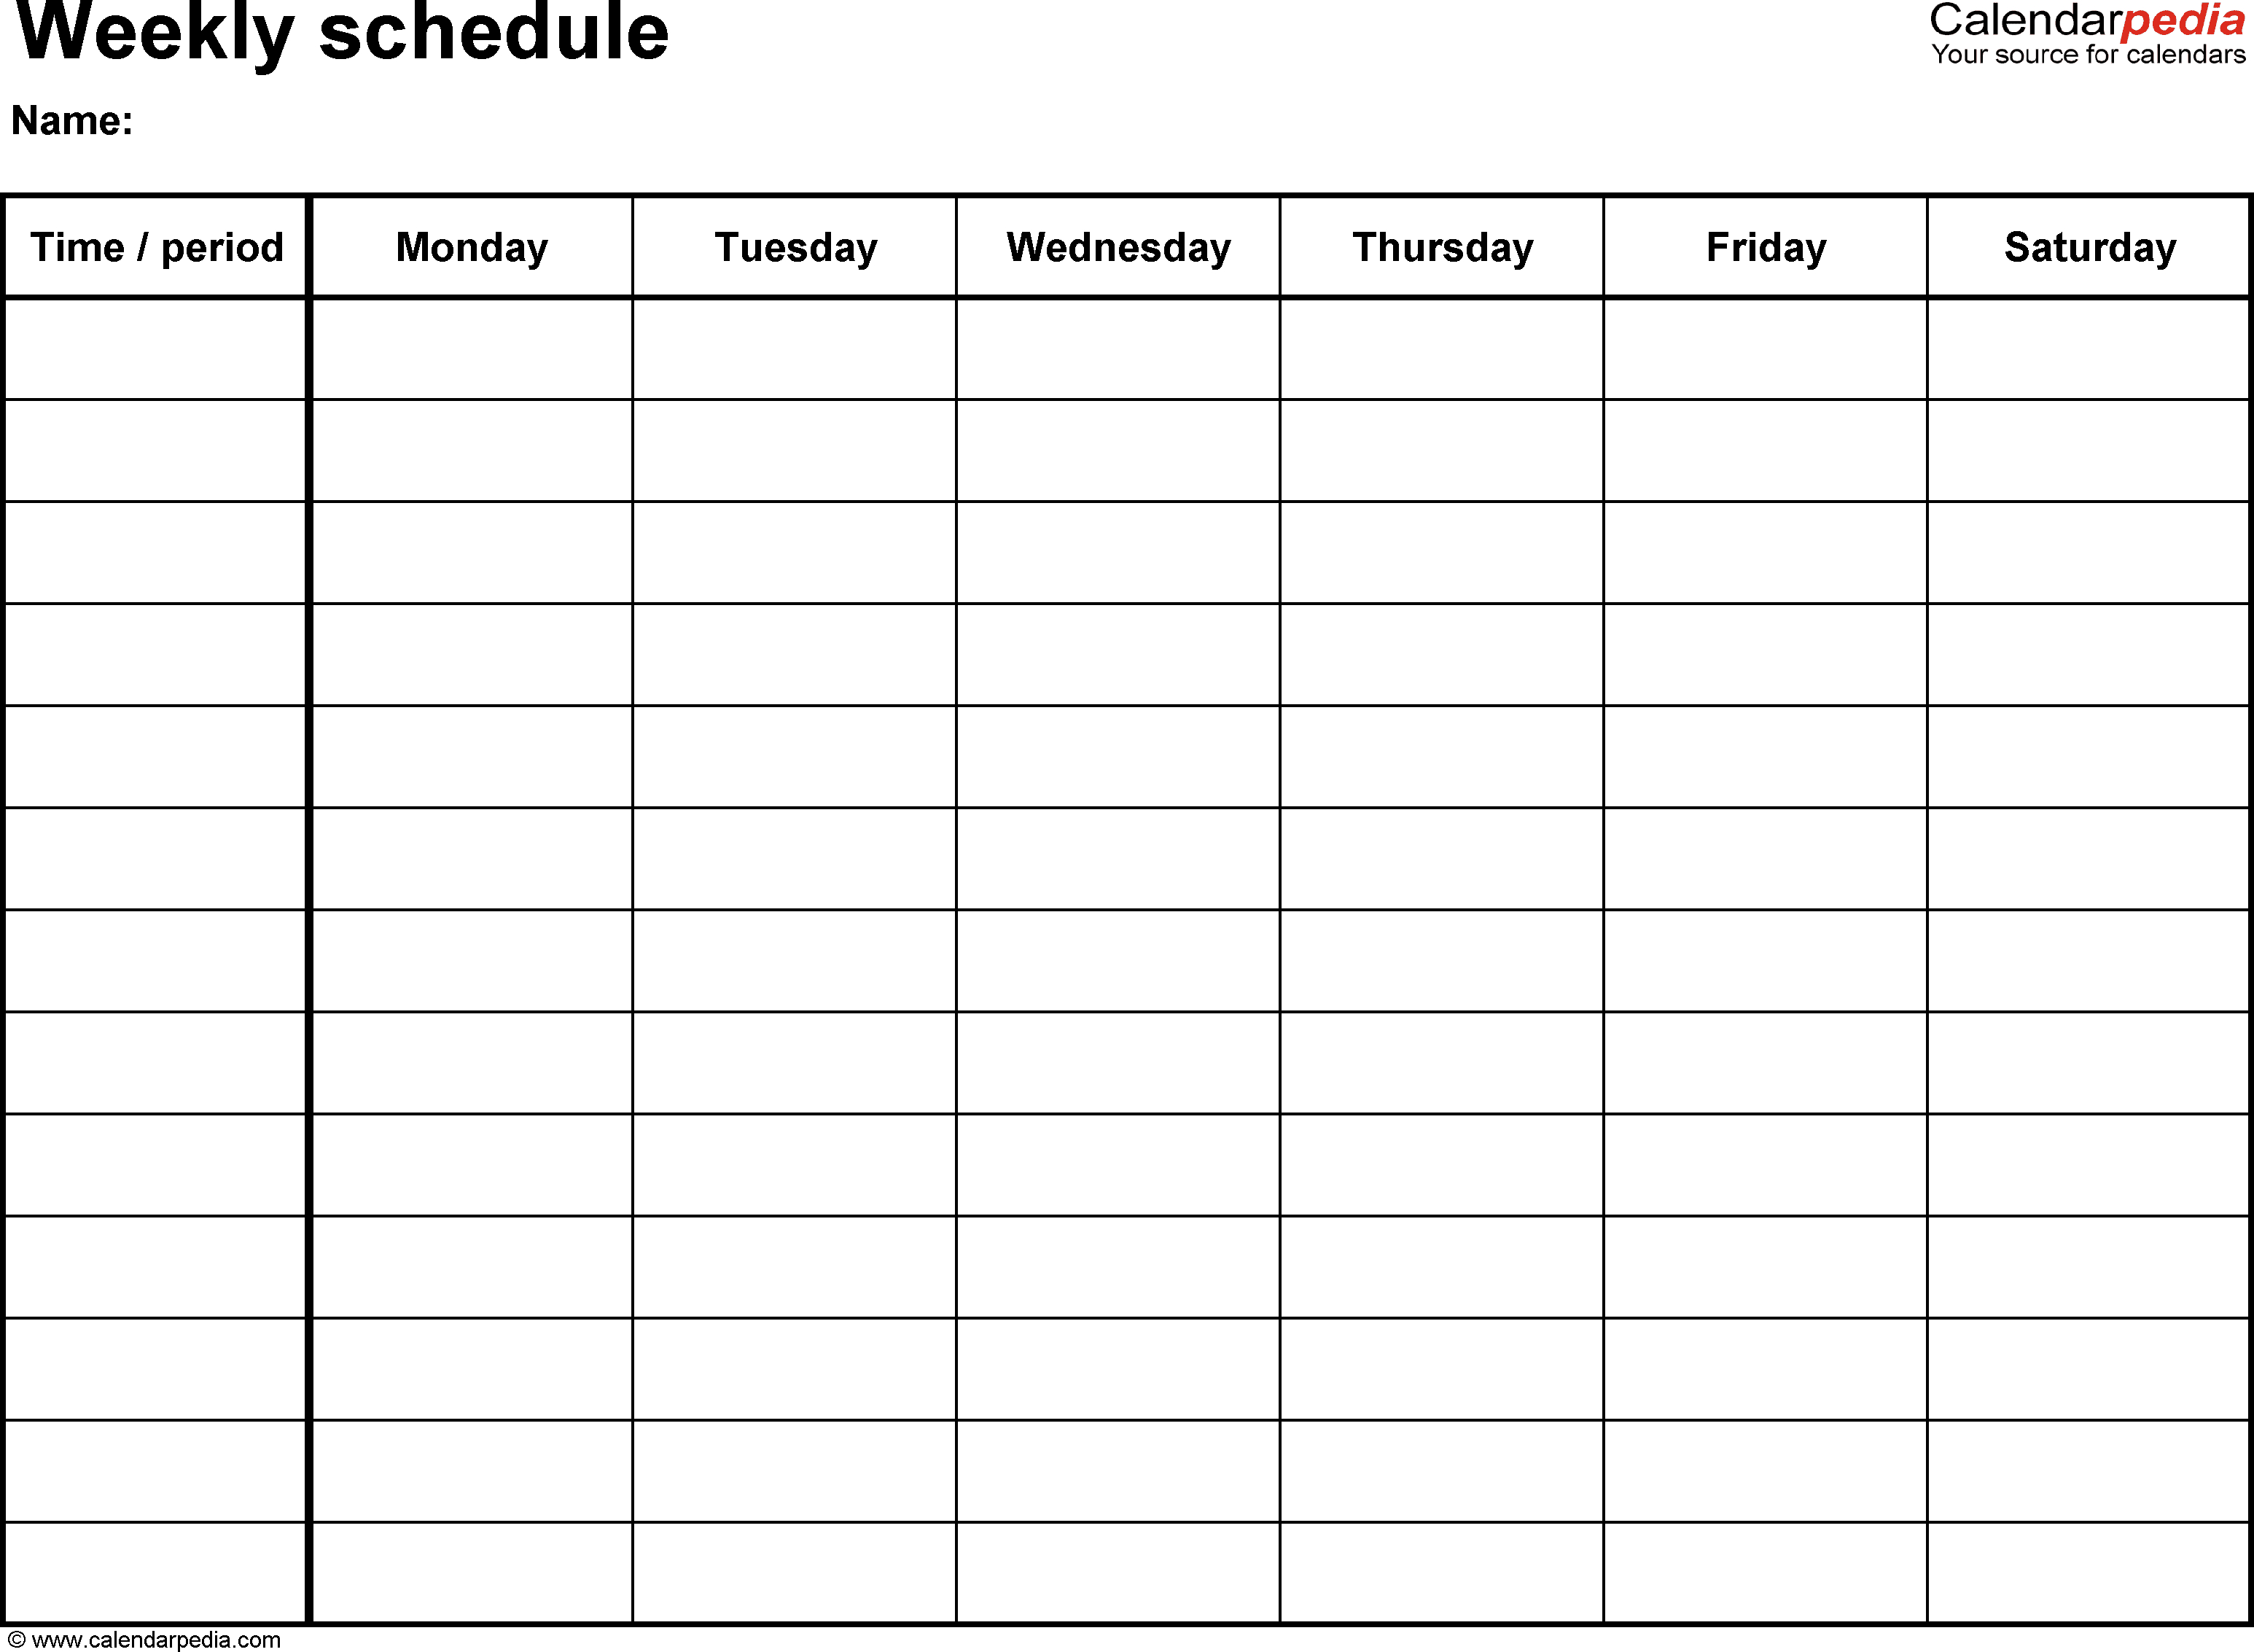 Weekly Downloadable Calendar  Bolan.horizonconsulting.co with Printable Weekly Calendar